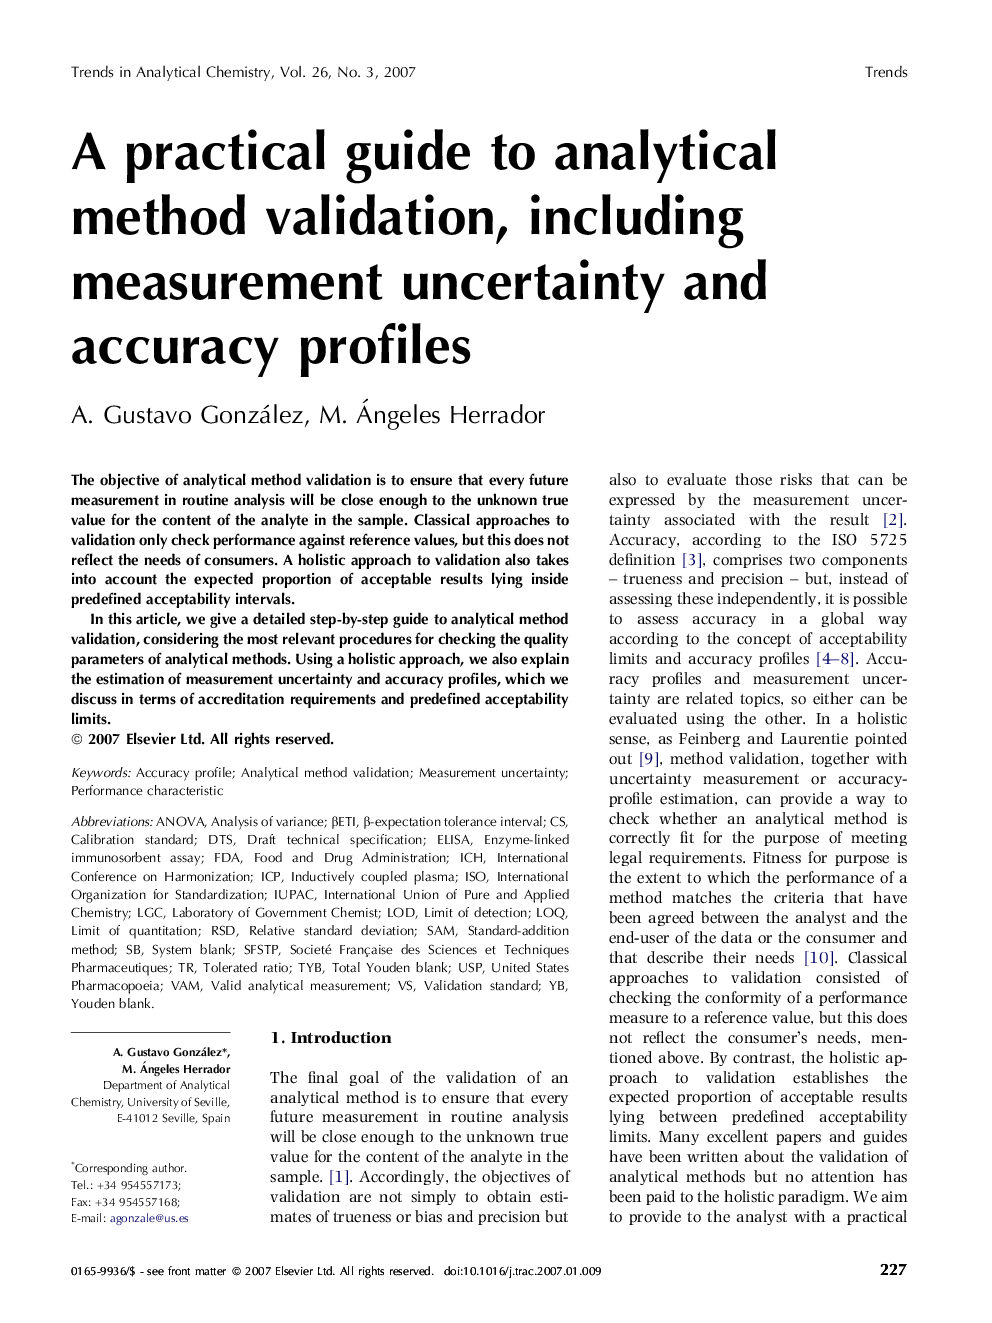 A practical guide to analytical method validation, including measurement uncertainty and accuracy profiles